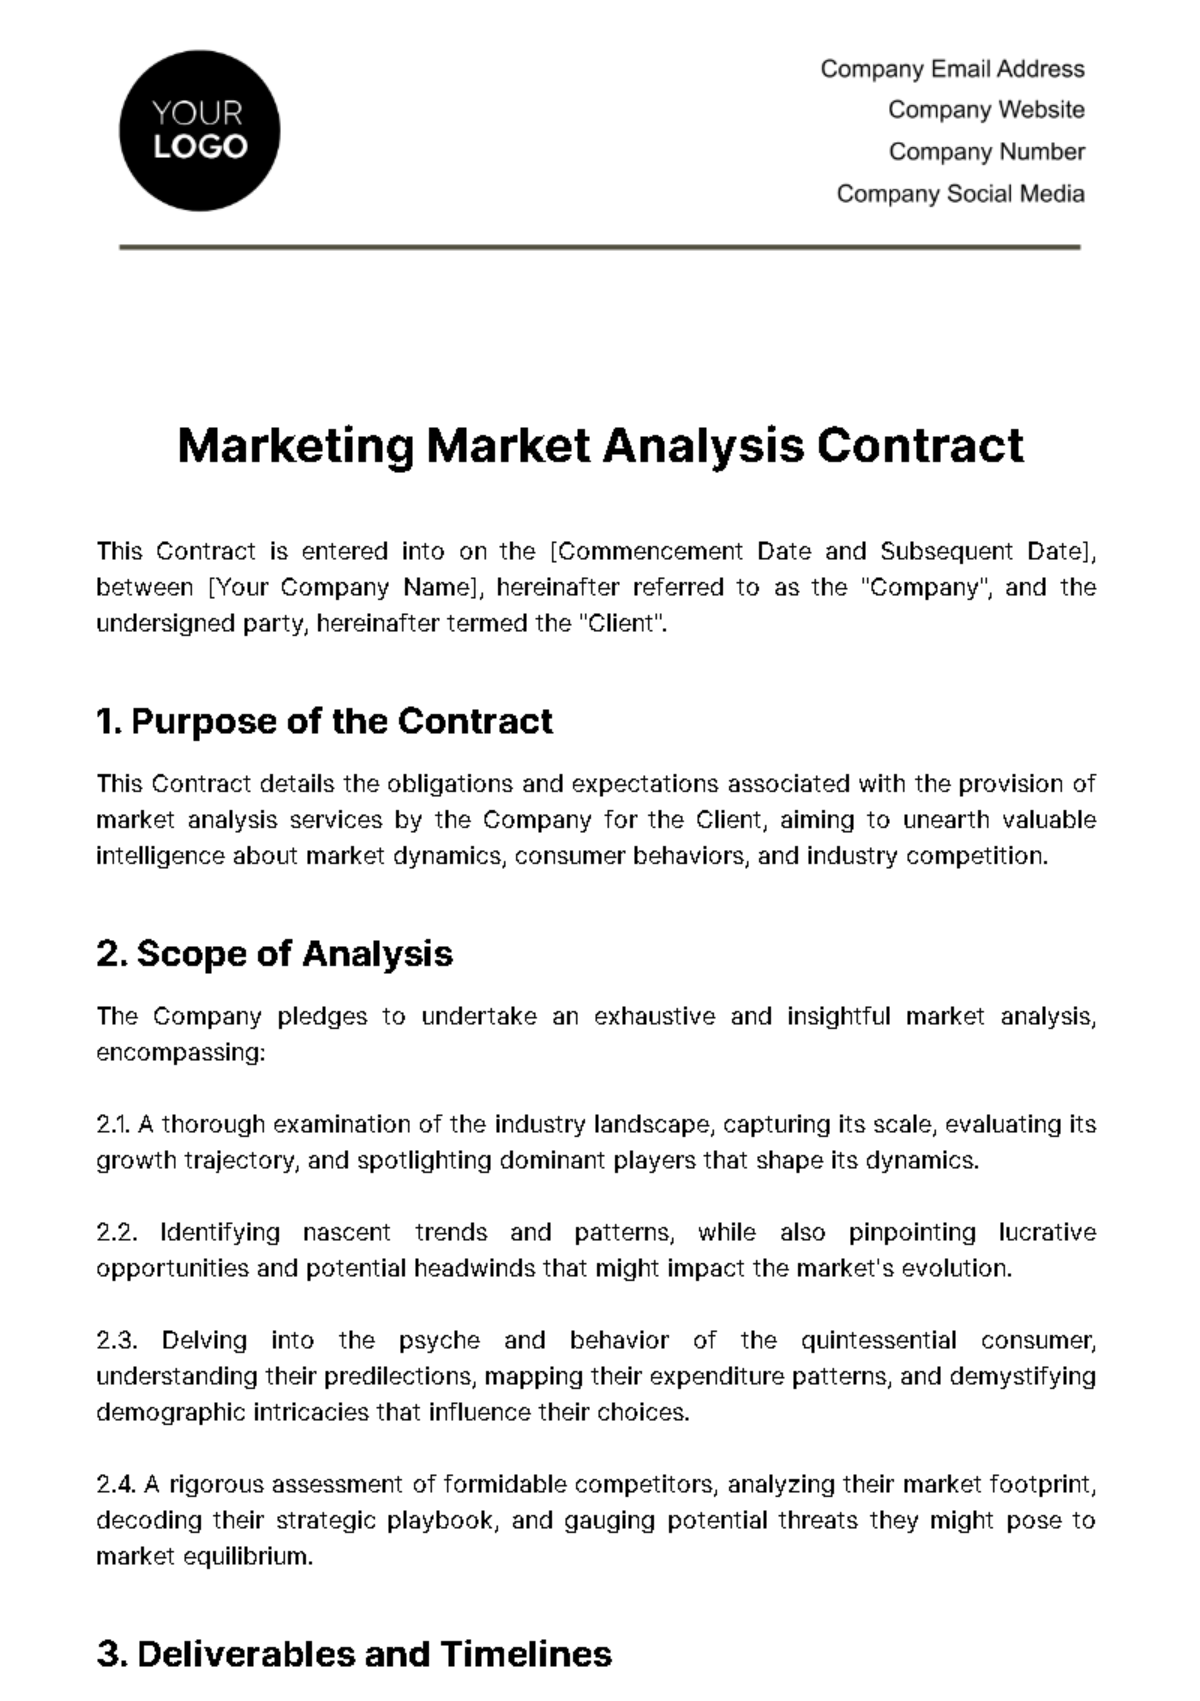 Free Marketing Market Analysis Contract Template